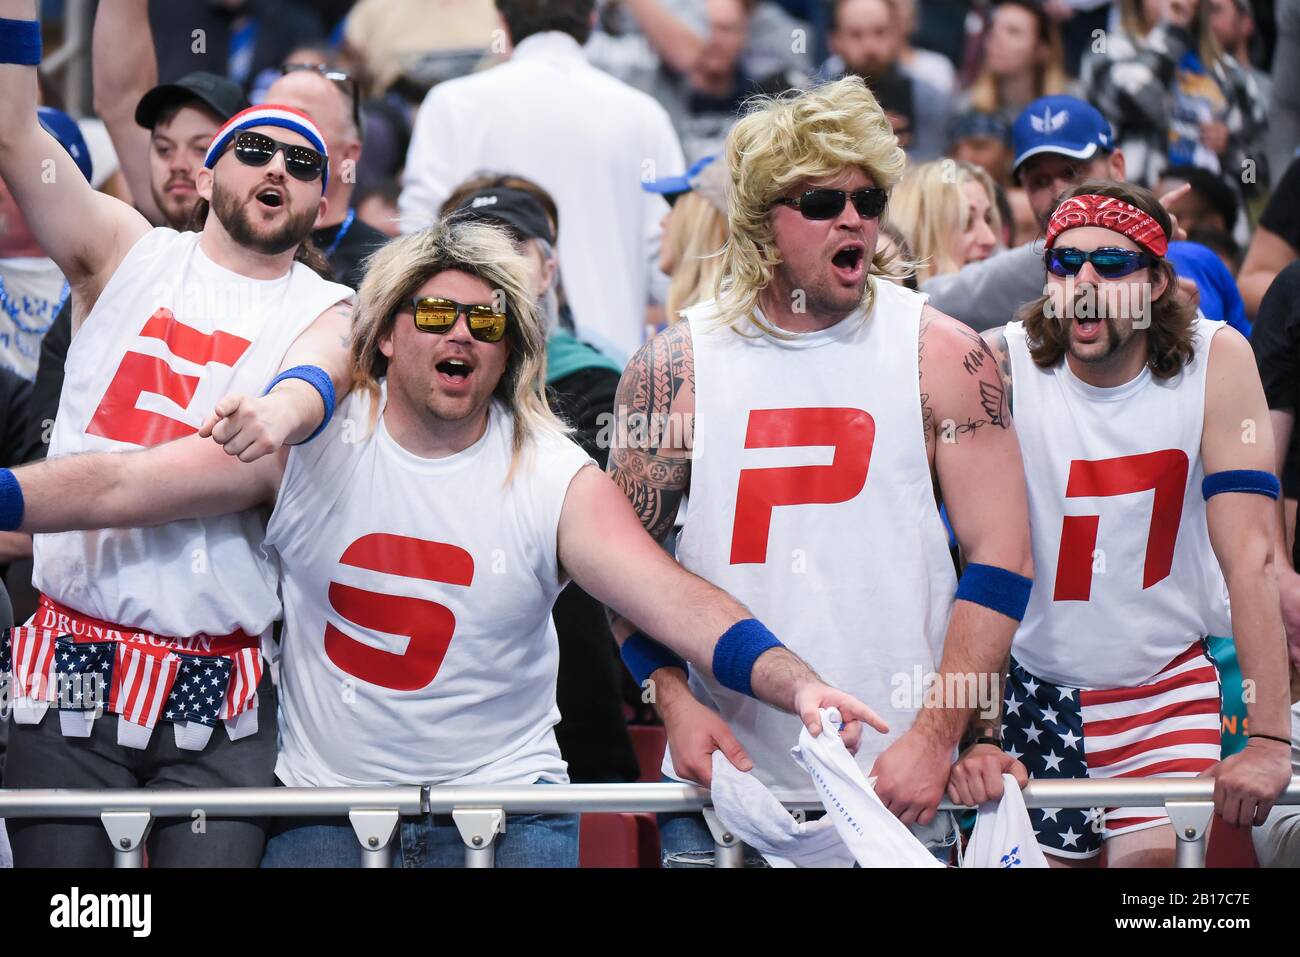 Feb 23, 2020: Fans dress up in support of ESPN who was broadcasting the  game in a game where the NY Guardians visited the St. Louis Battlehawks.  Held at The Dome at